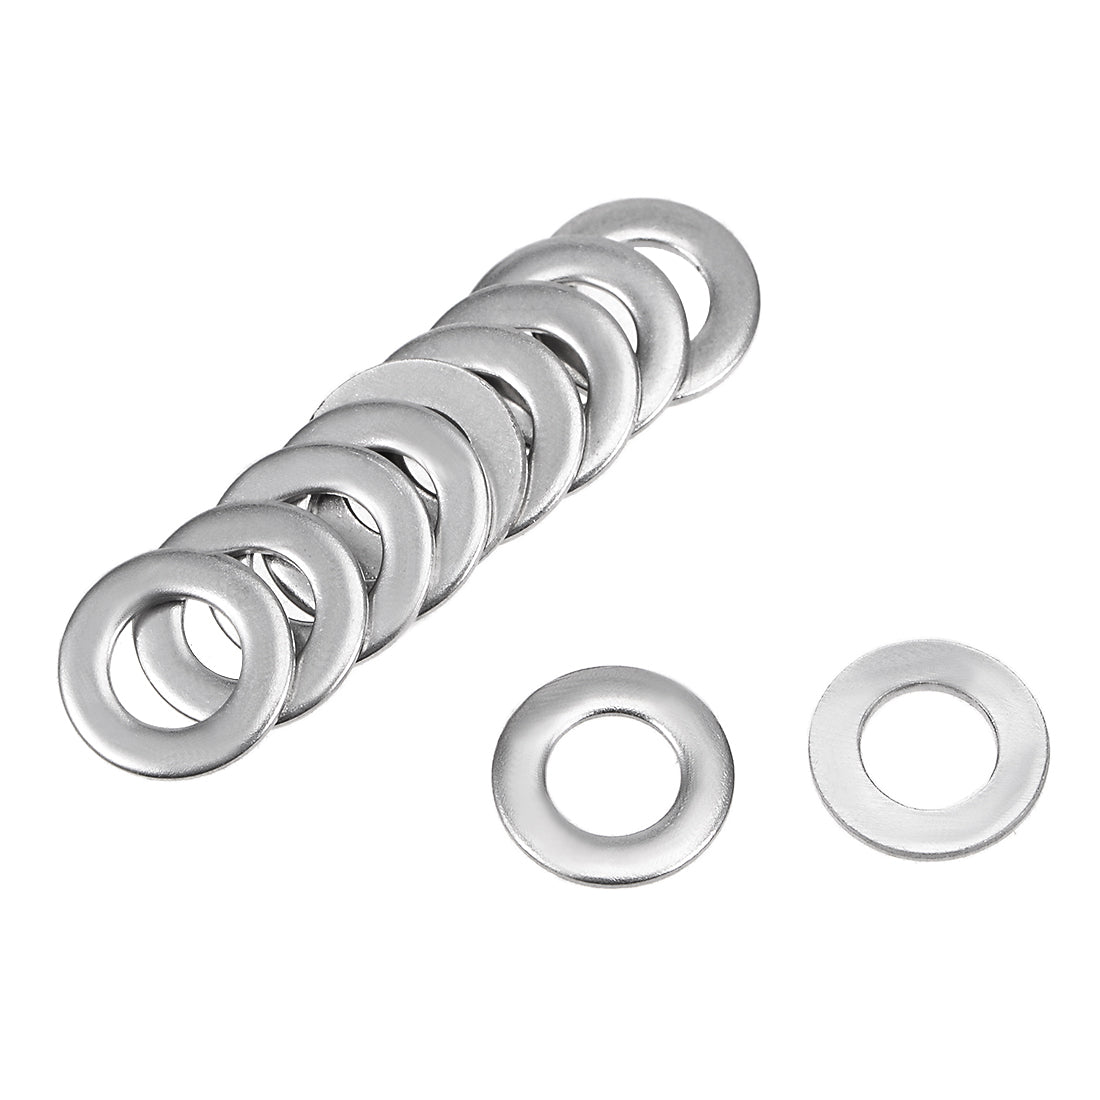 uxcell Uxcell 100 Pcs 4mm x 8mm x 0.8mm metal Flat Washer for Screw Bolt